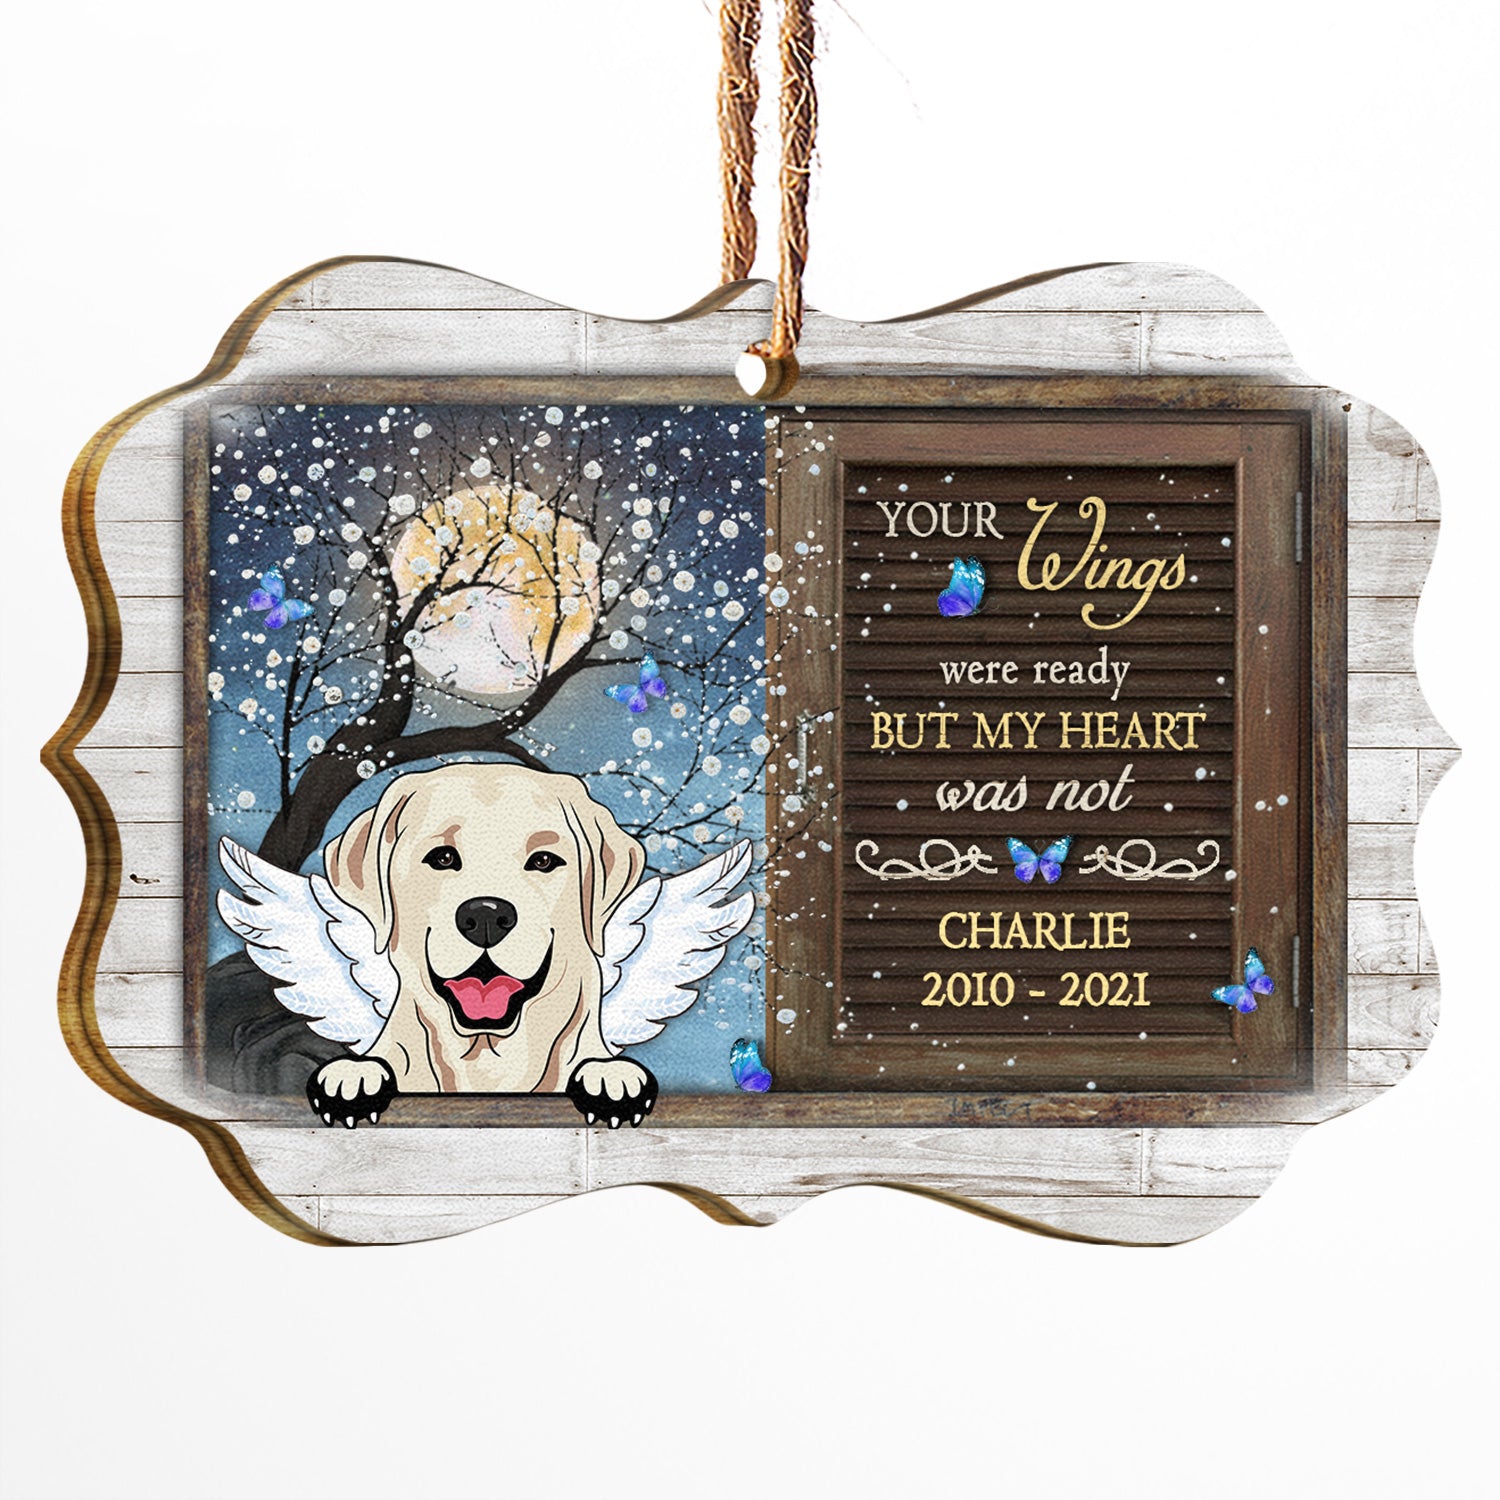 Your Wings Were Ready - Memorial Gift For Dog Owners - Personalized Wooden Ornament